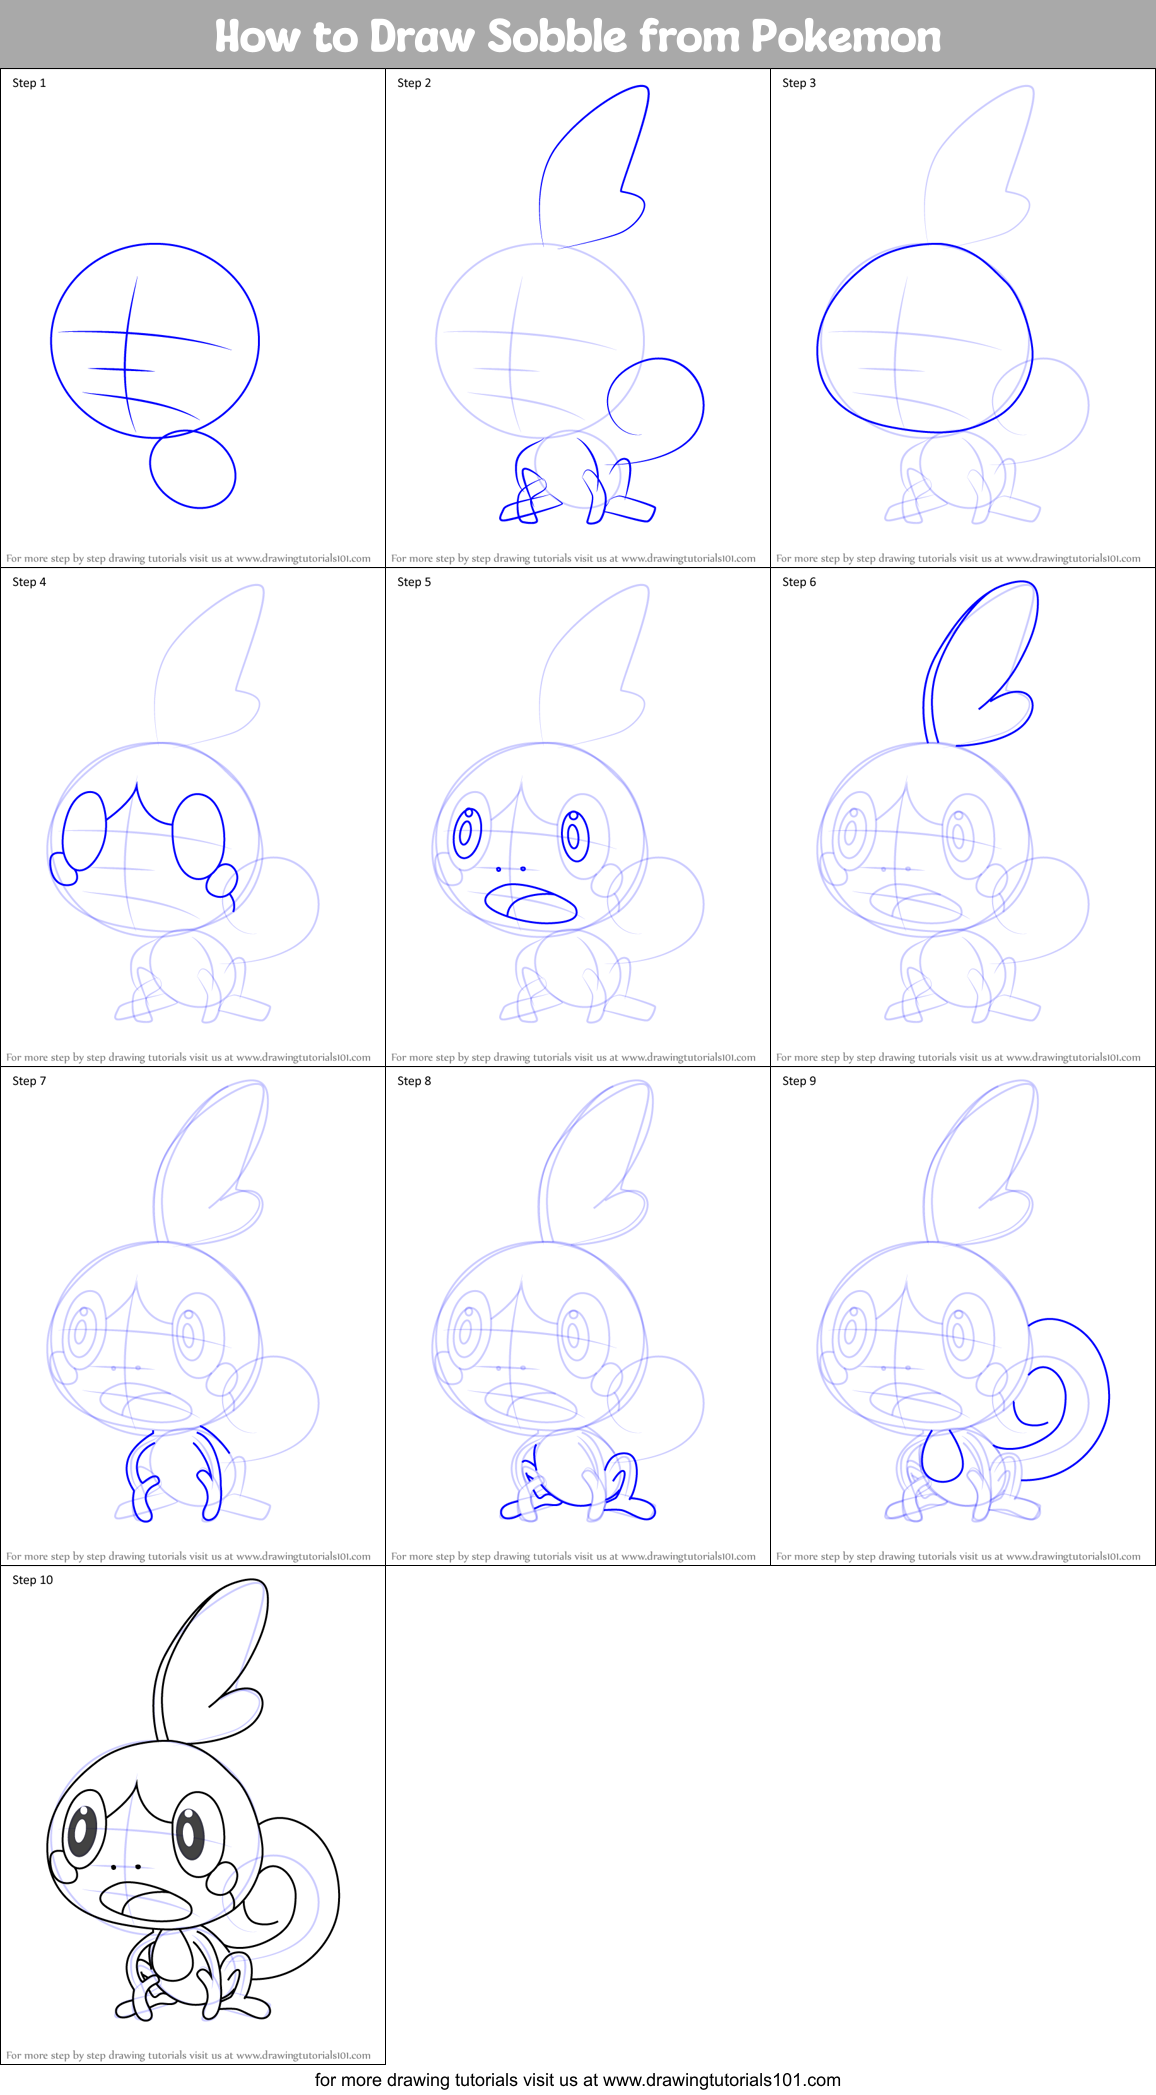 How to Draw Sobble from Pokemon printable step by step drawing sheet